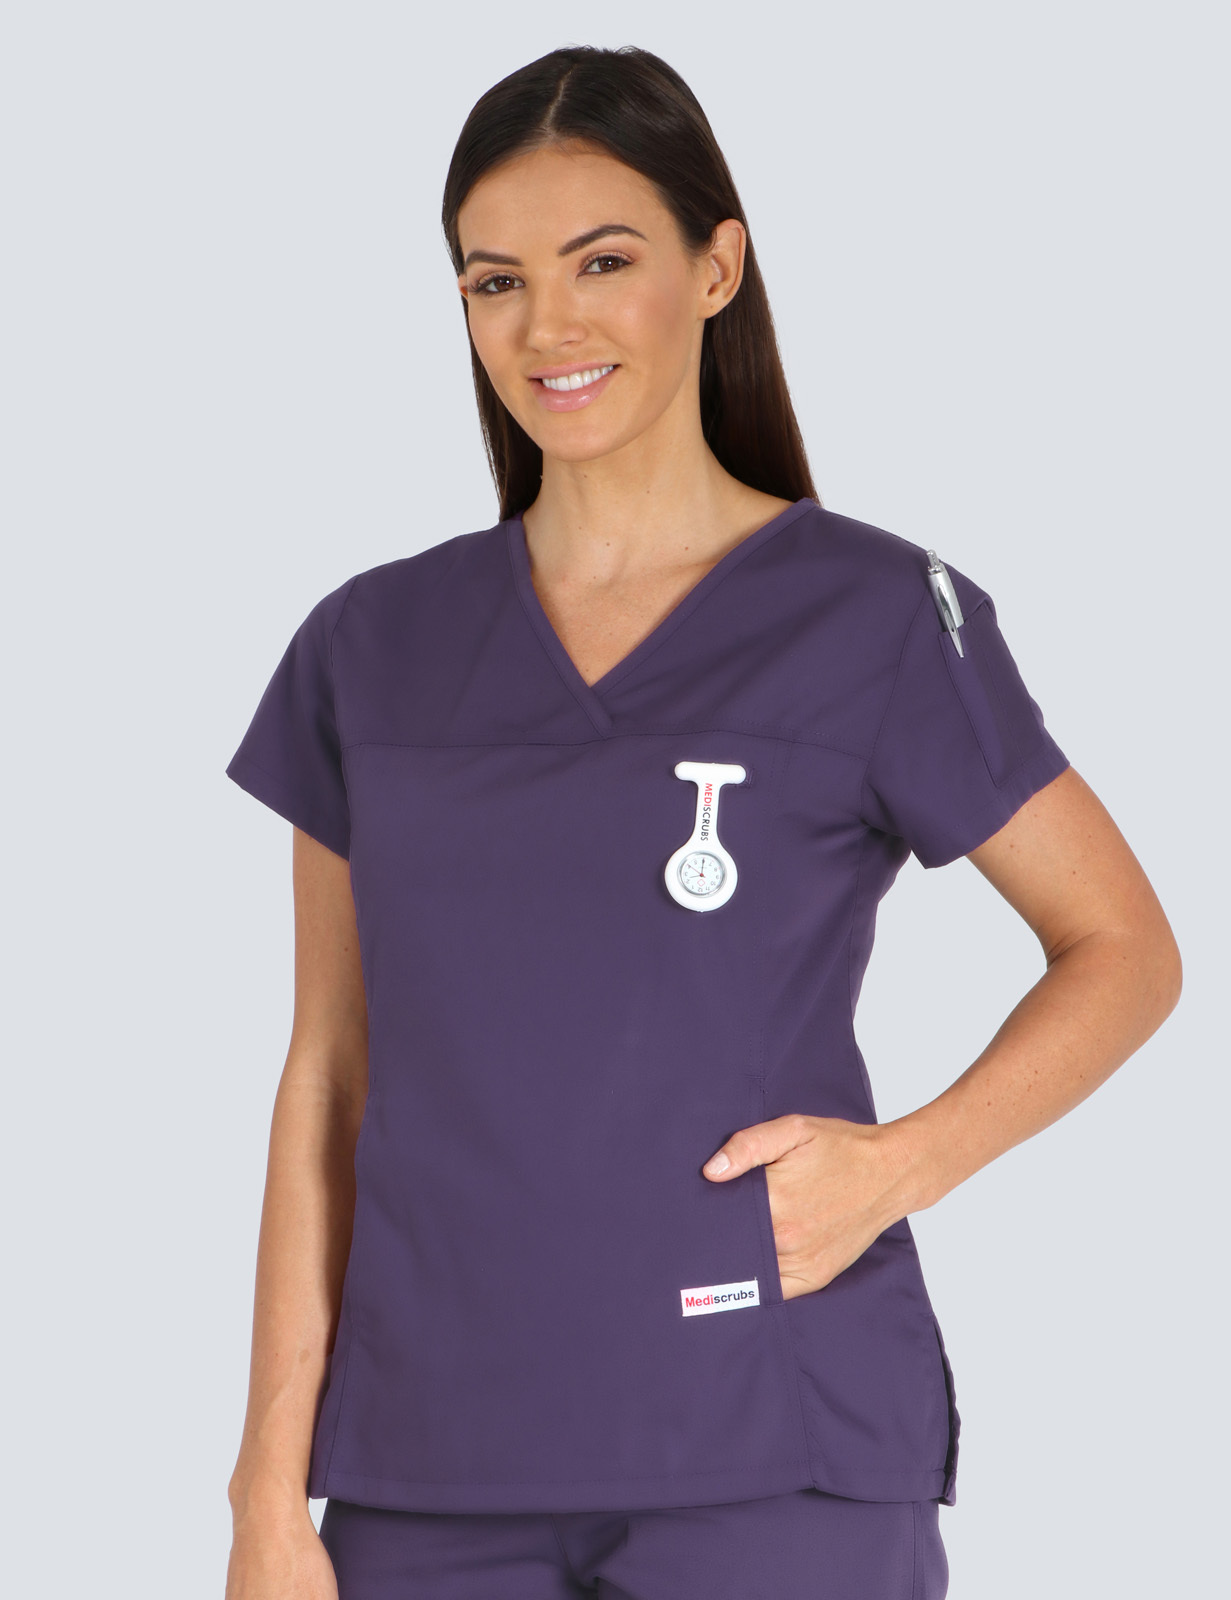 Redland Hospital - Medical Imaging (Women's Fit Spandex Scrub Top and Cargo Pants in Aubergine incl Logos)